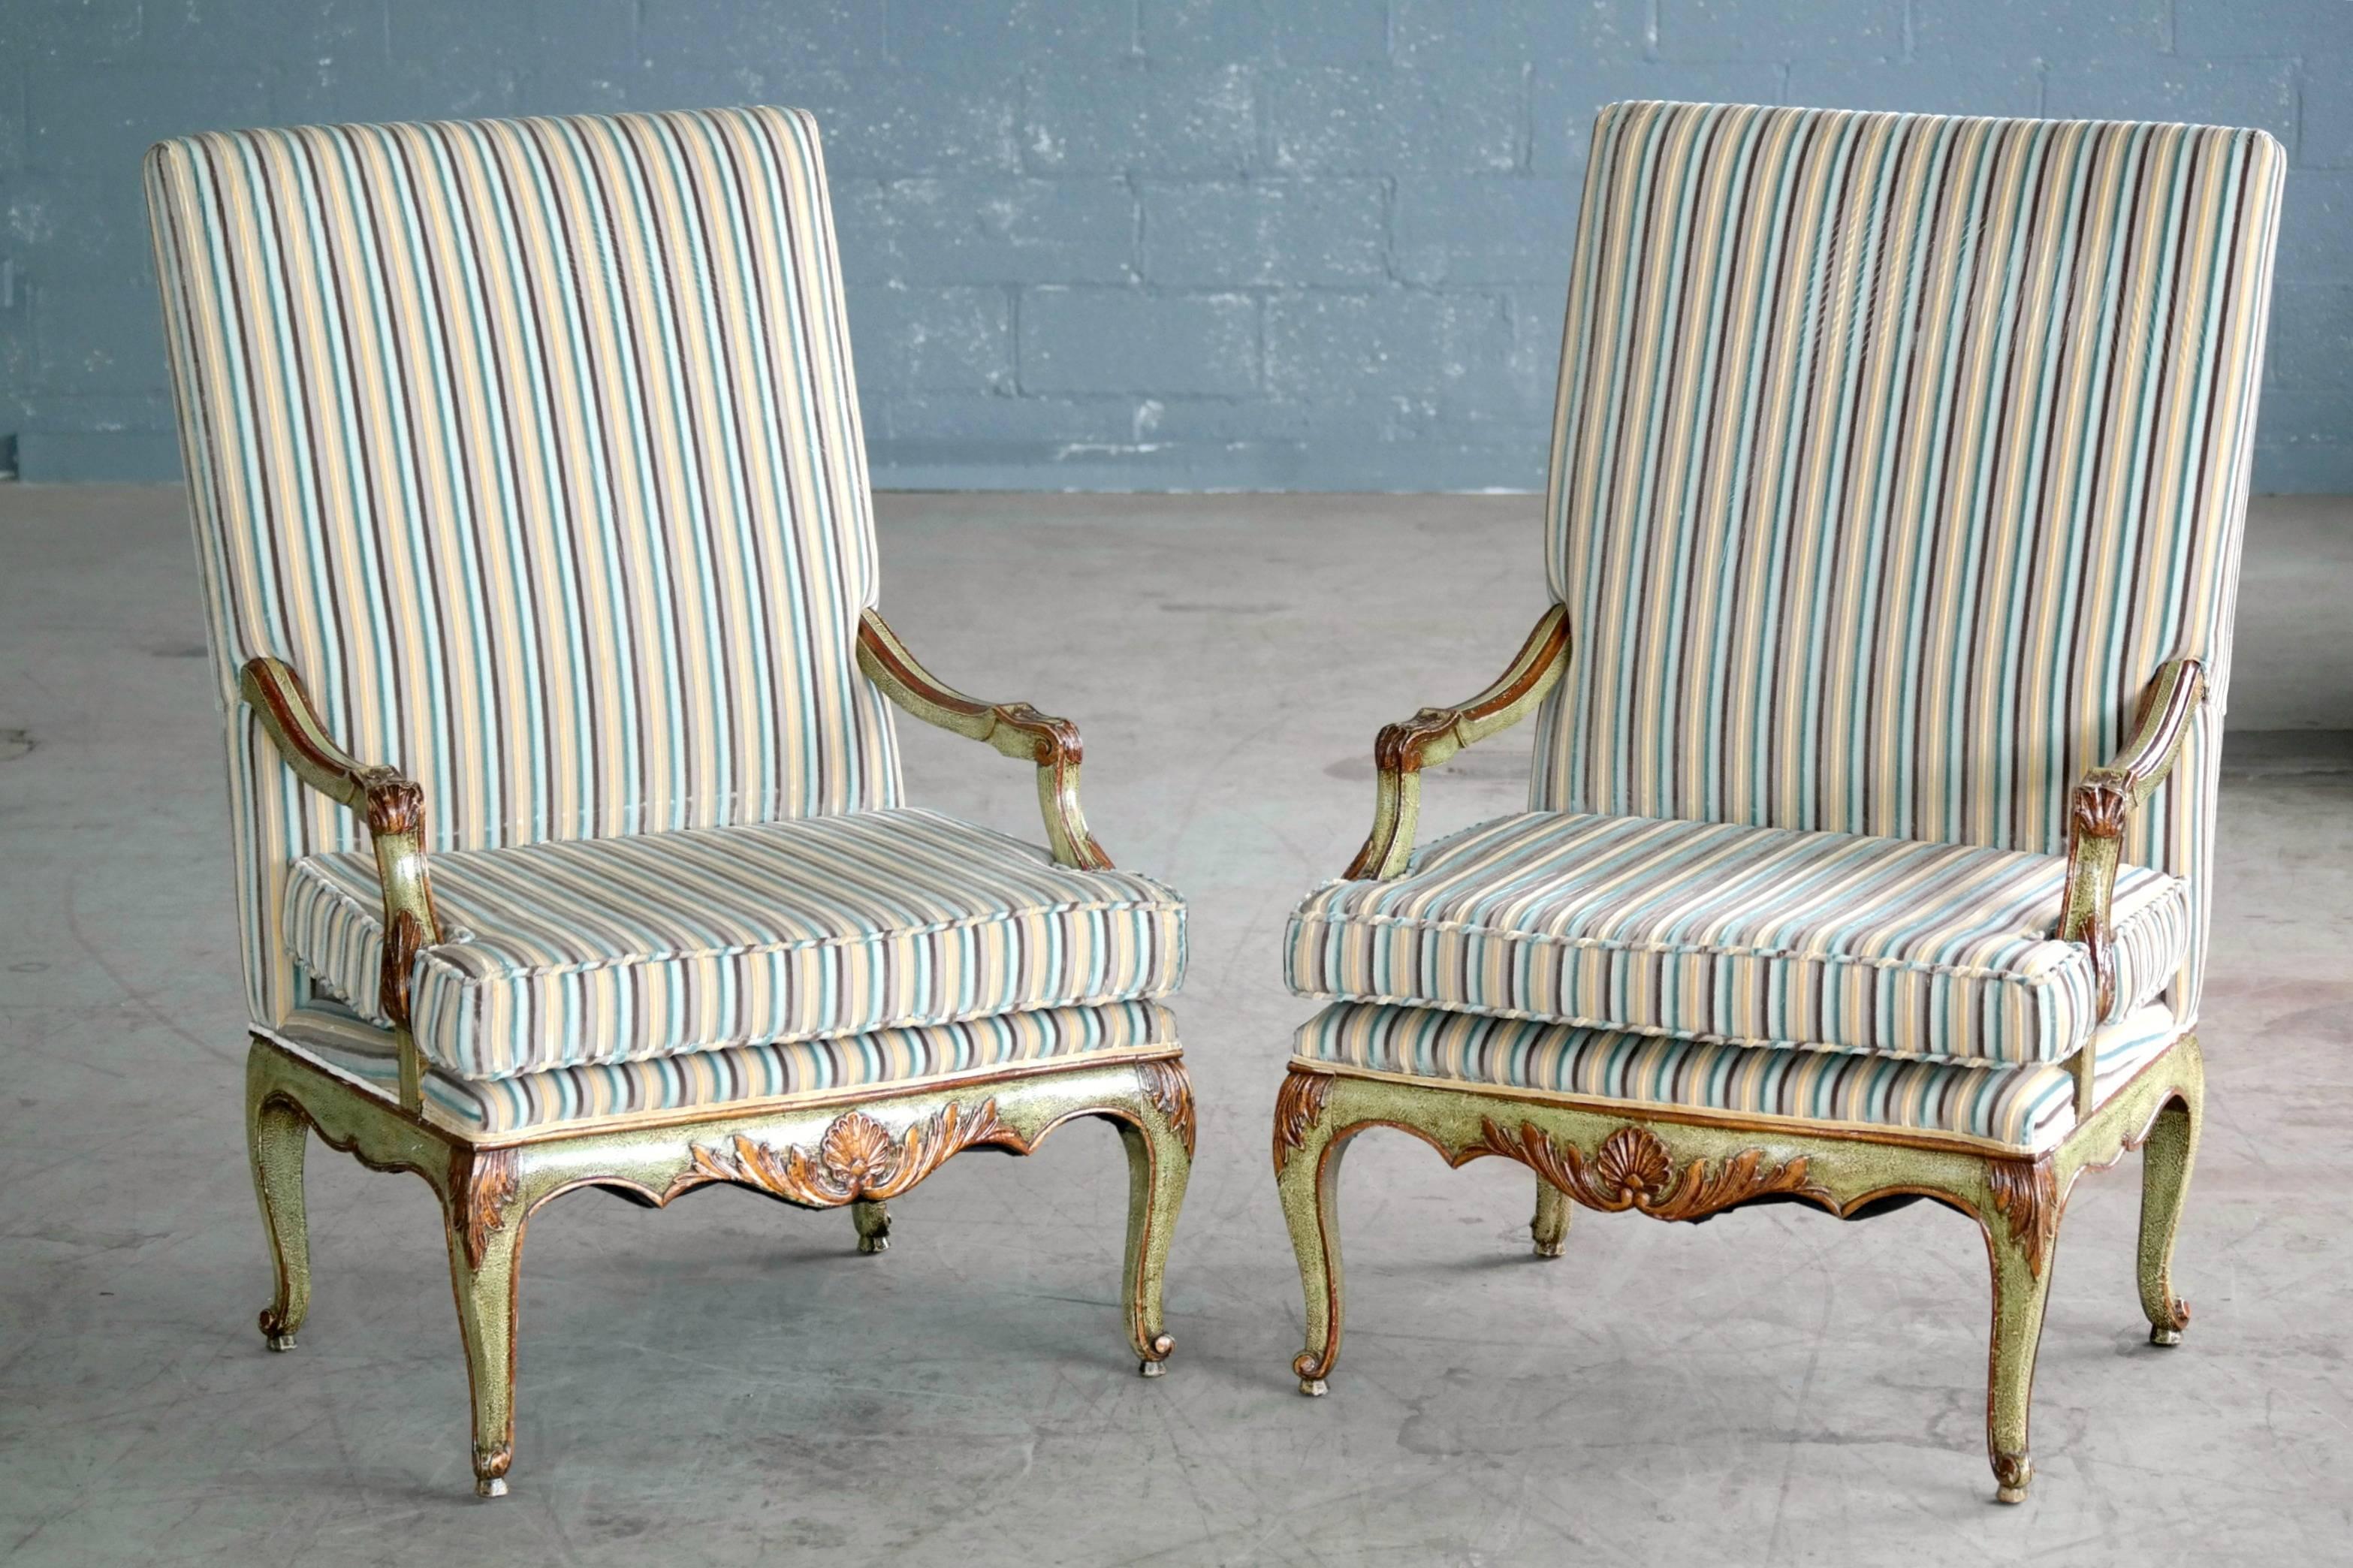 Excellent pair of hand-carved and painted high back Danish armchairs in the Regency style made circa 1900. Recently refurbished and upholstered in a striped velvet. Excellent condition.

